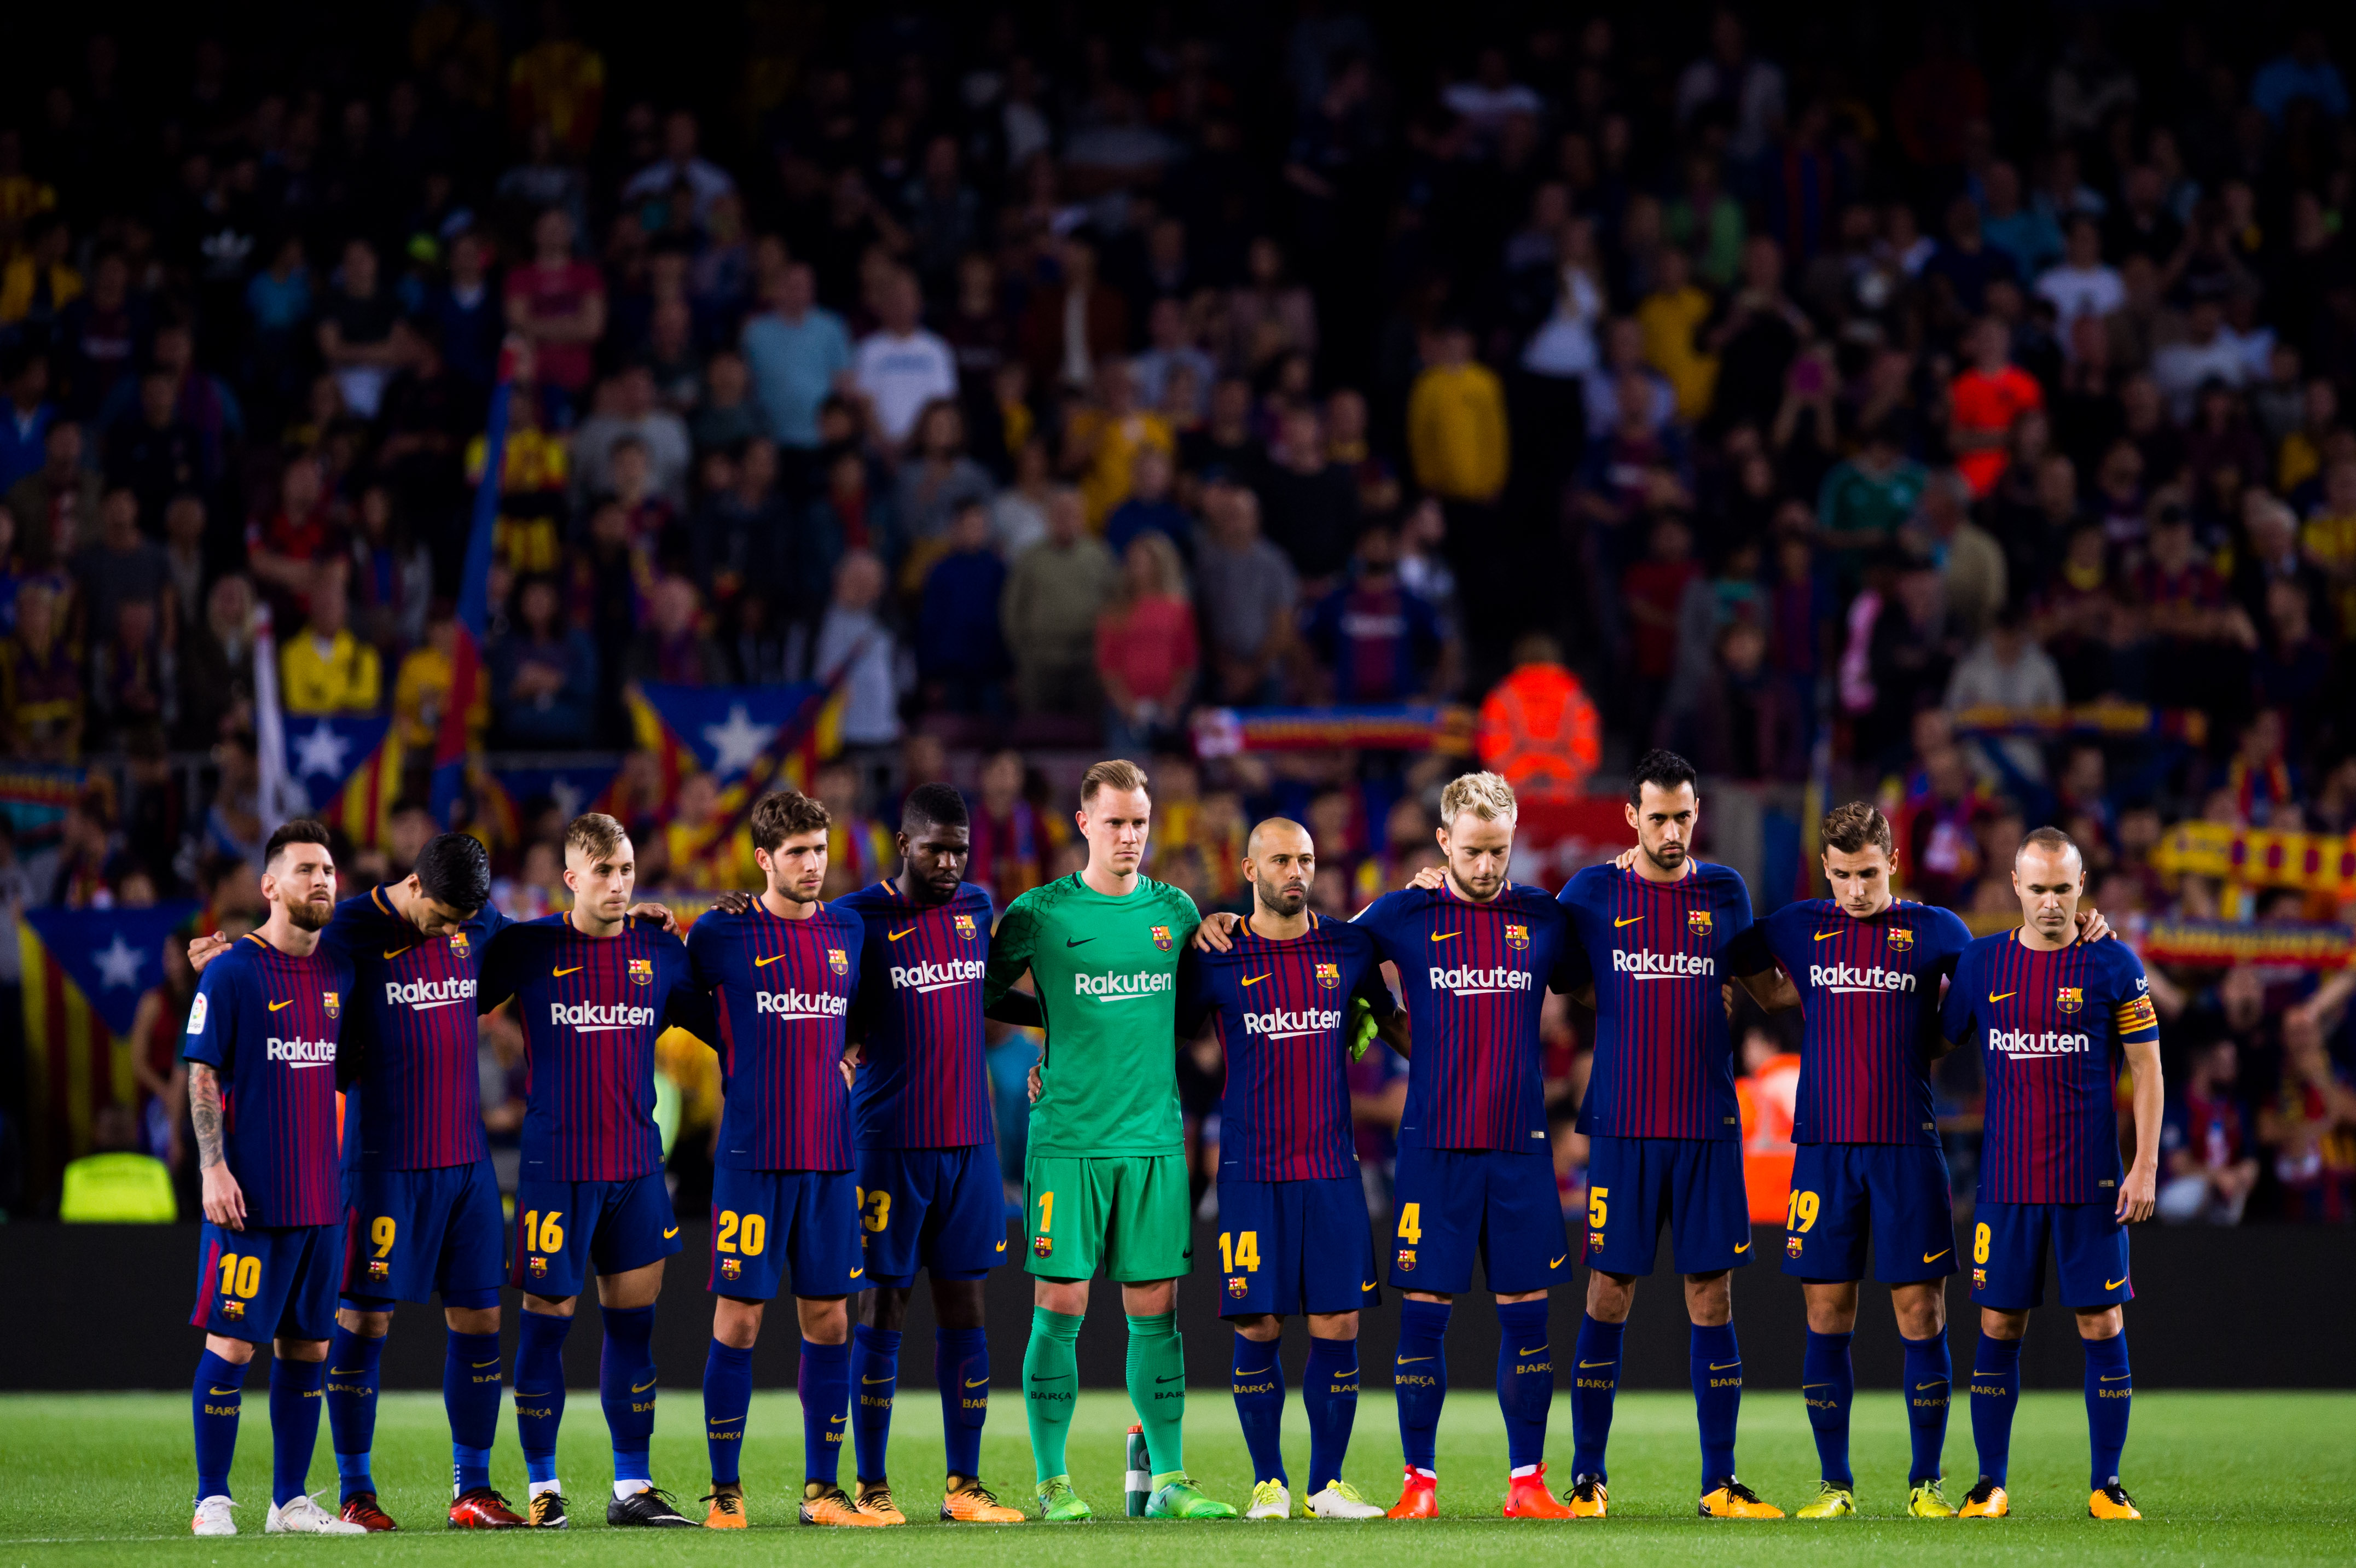 BARCELONA, SPAIN - OCTOBER 21: Players of FC Barcelona observe a minute of silence before the La Liga match between Barcelona and Malaga at Camp Nou on October 21, 2017 in Barcelona, Spain. (Photo by Alex Capaeros/Getty Images)